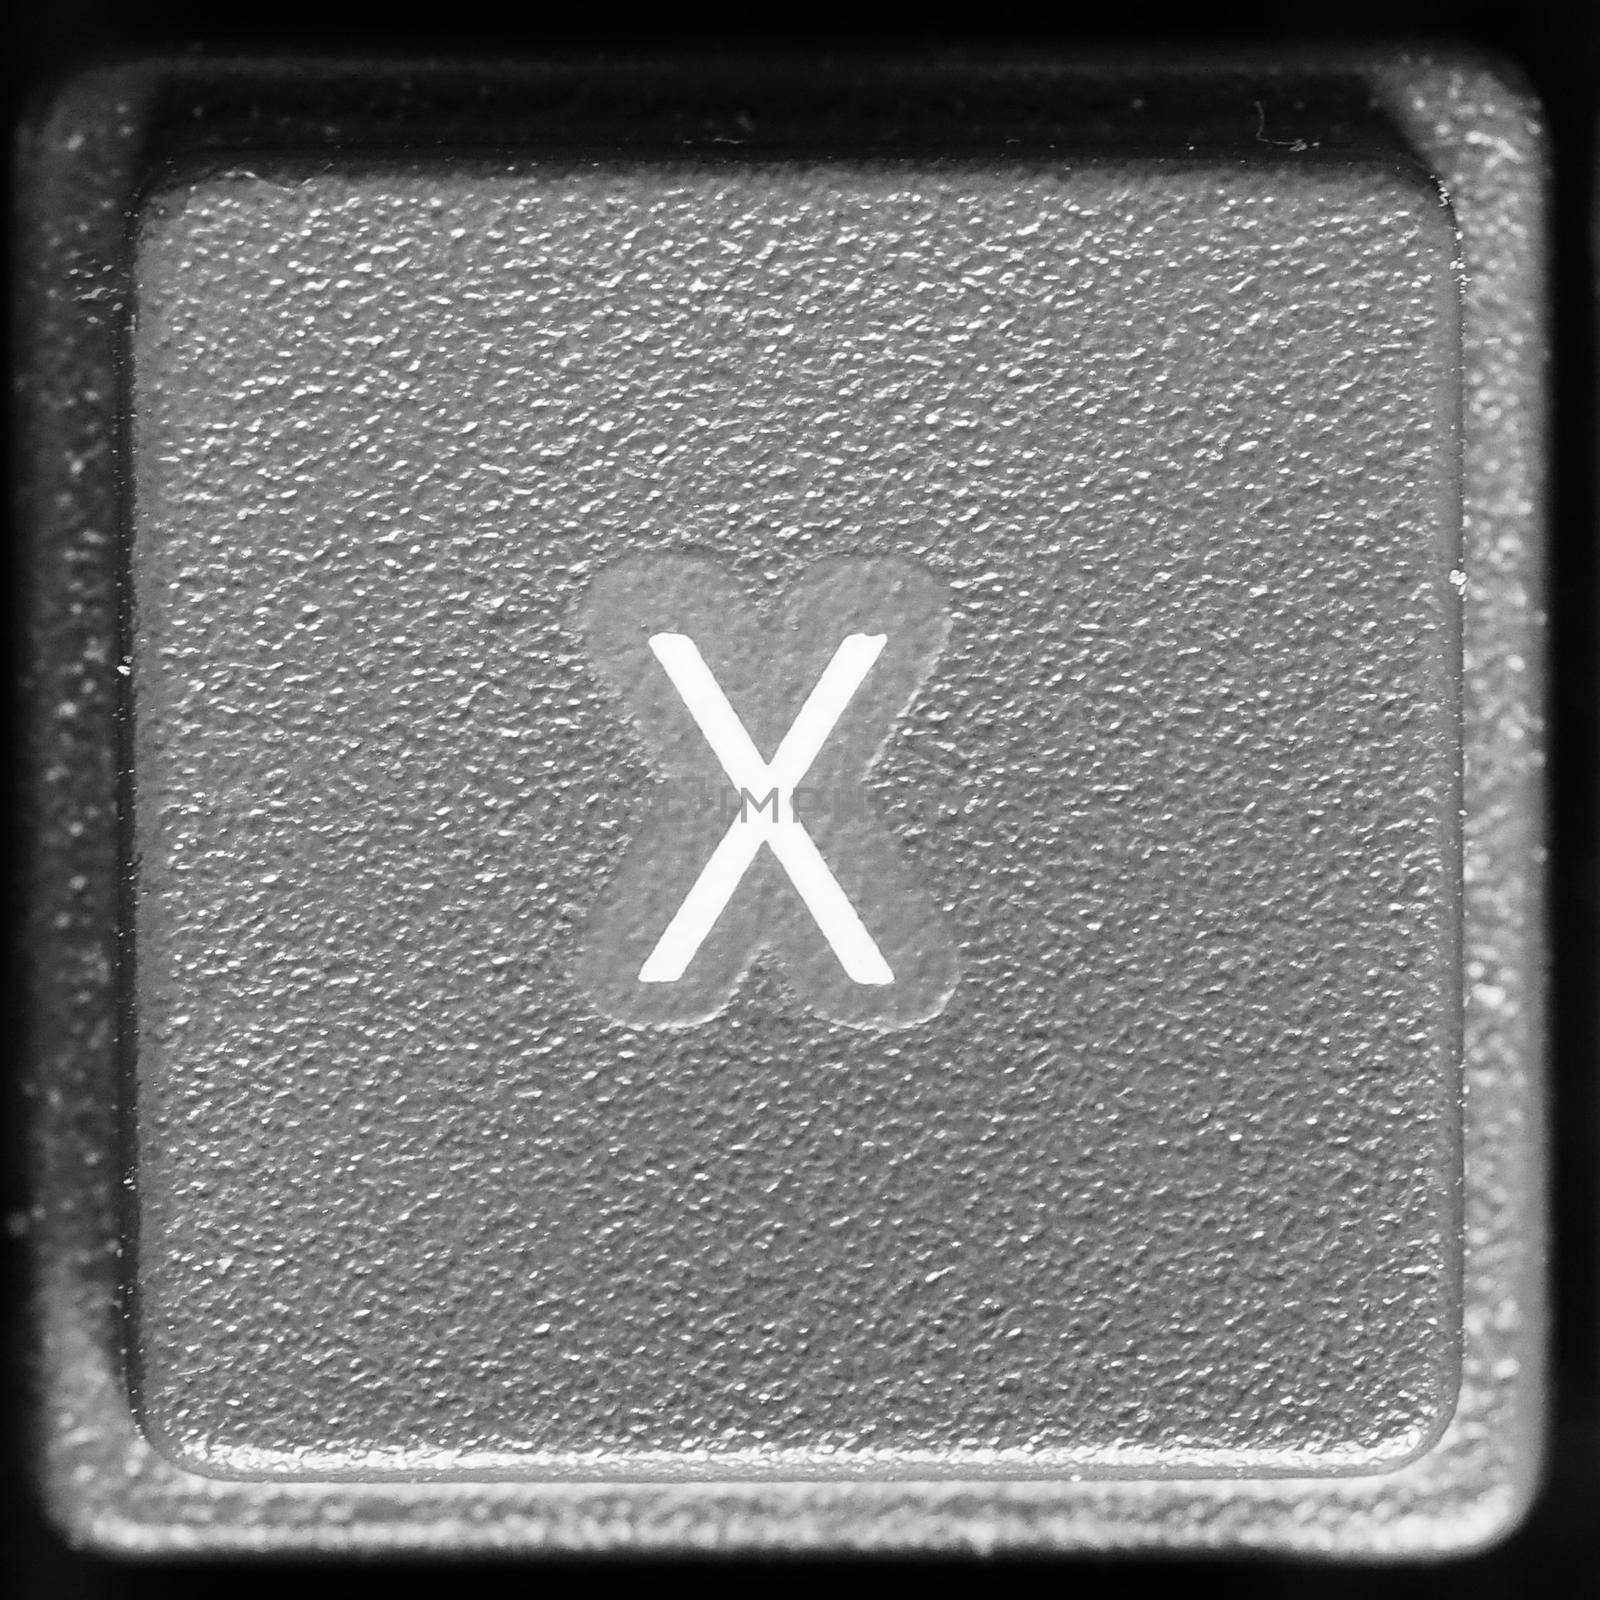 Letter X on computer keyboard by claudiodivizia